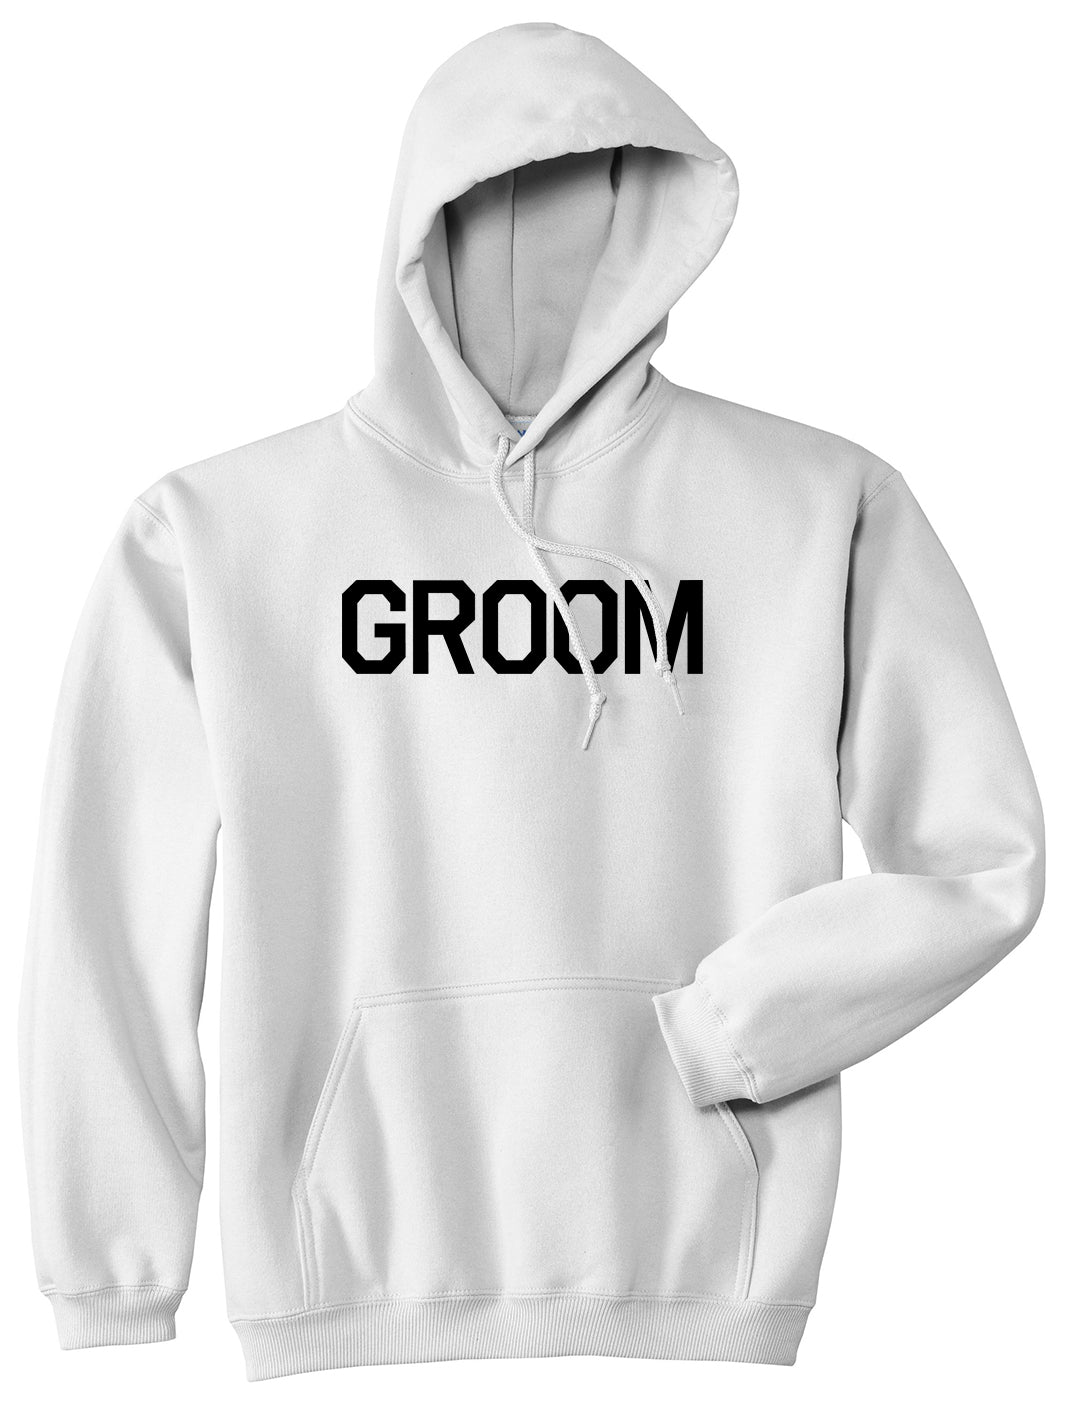 The Groom Bachelor Party White Pullover Hoodie by Kings Of NY